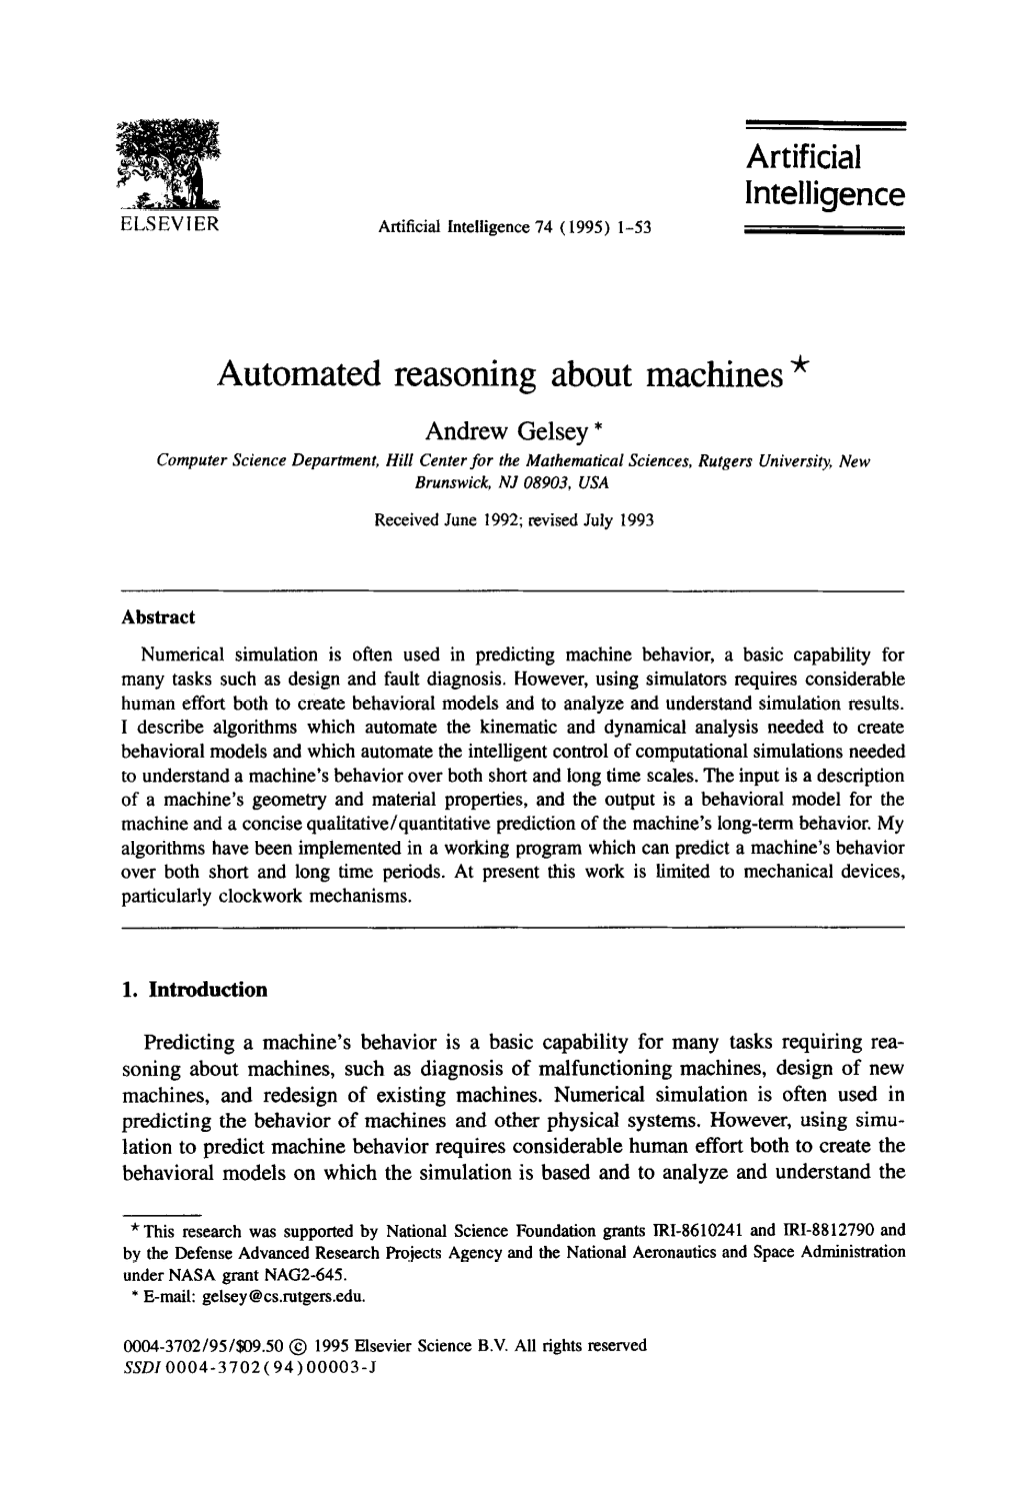 Automated Reasoning About Machines *